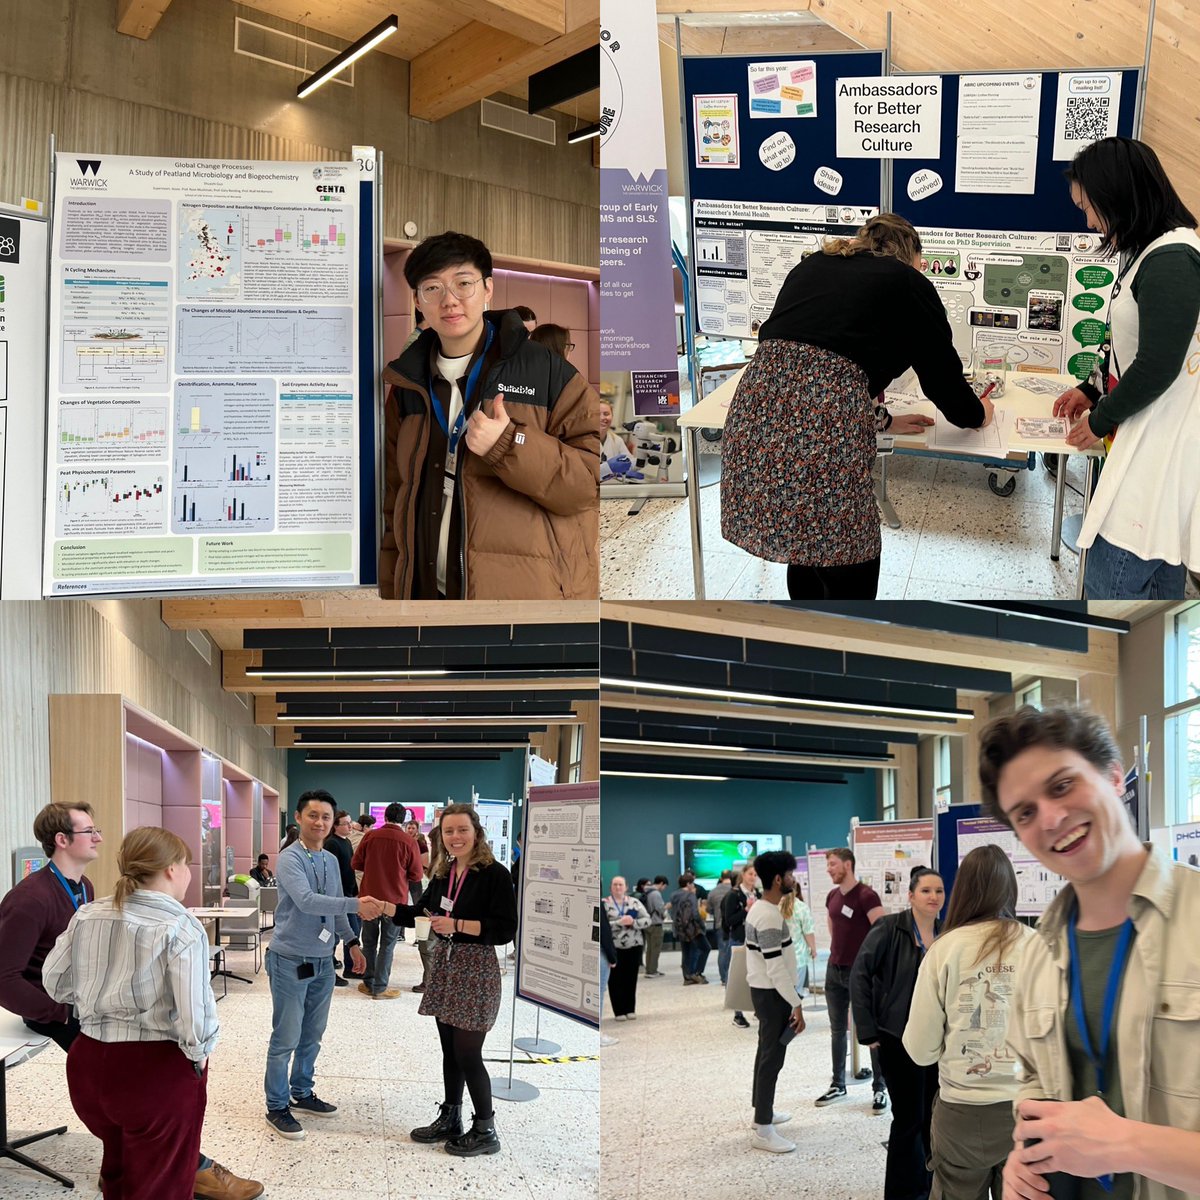 PGR Symposium is like PhD students’ sports day — you have more chocolate and biscuits than real food😥 I learnt so much from all the wonderful talks and posters!! Well done for all the presenters and everyone who helped organize it💚💚